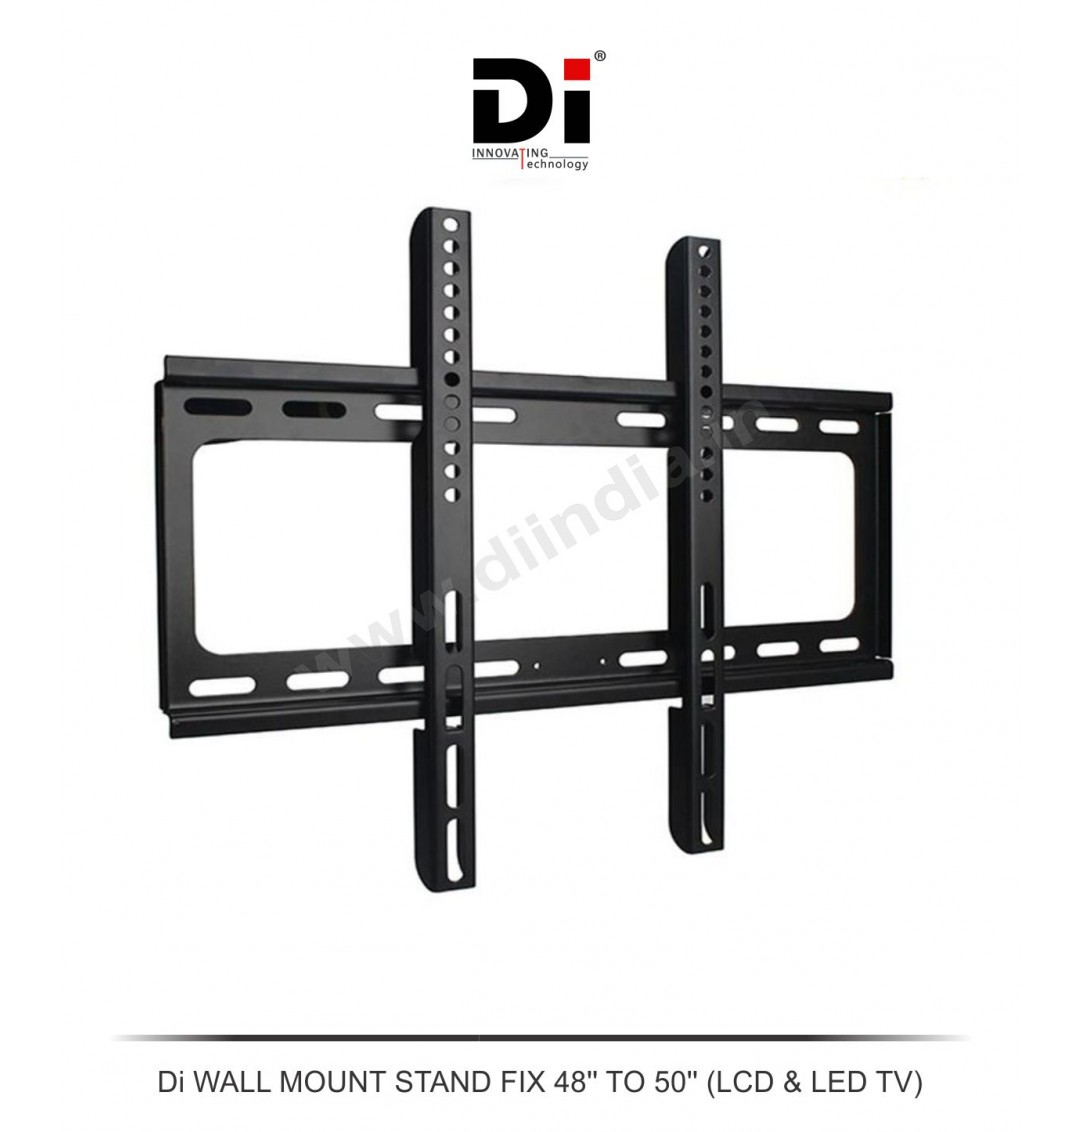 WALL MOUNT STAND FIX 48'' TO 50'' (LCD & LED TV)